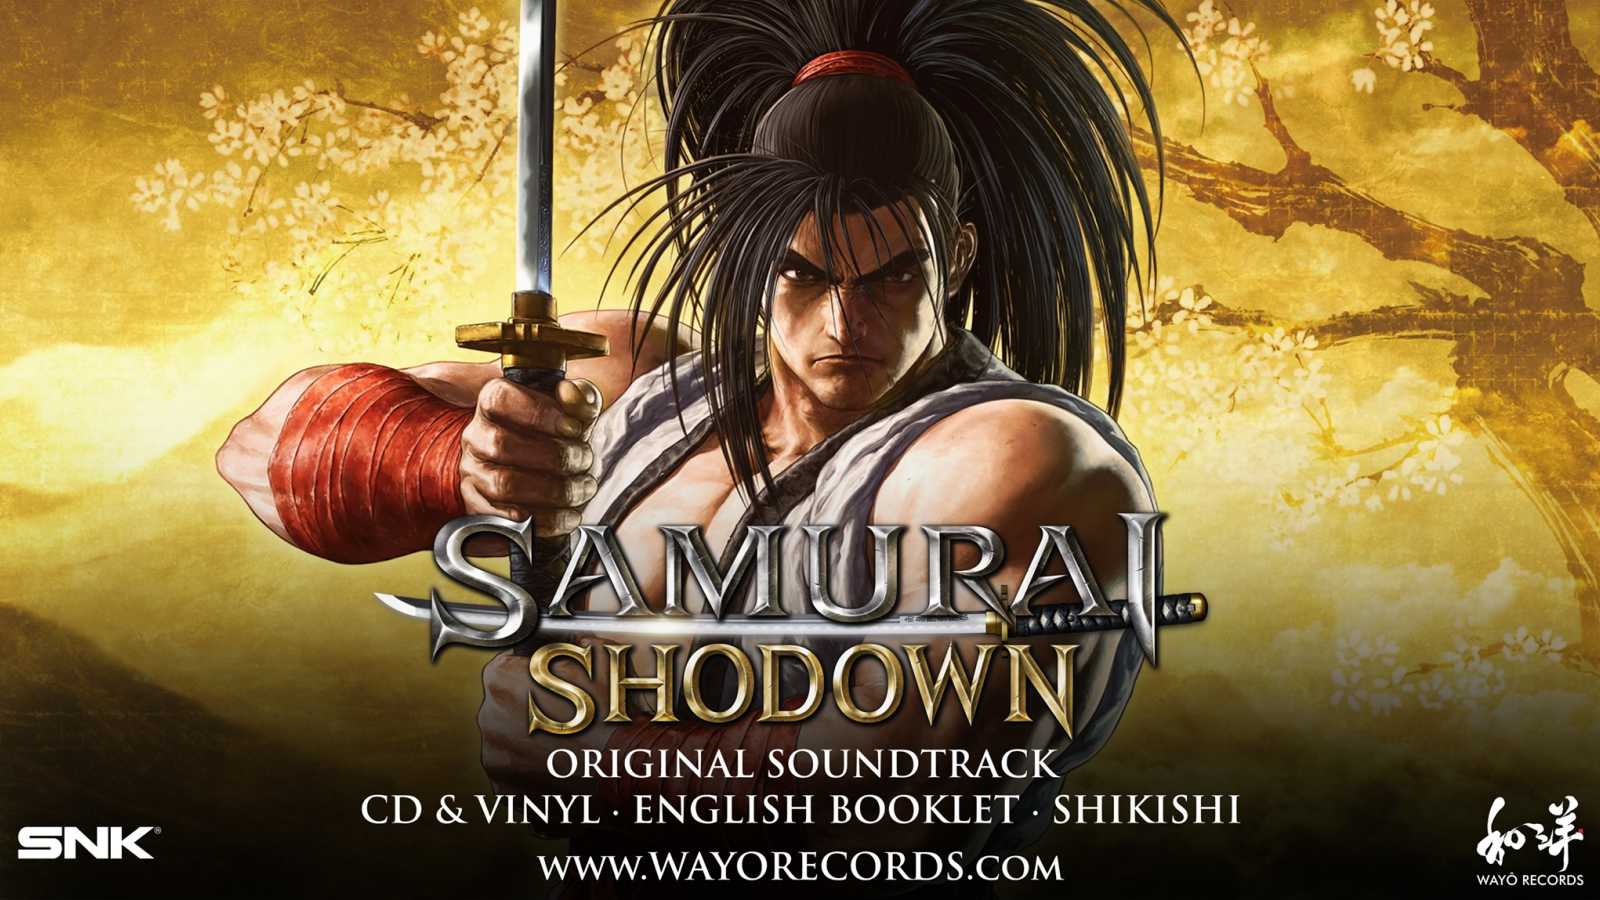 Samurai Shodown chez Wayo Records © SNK / Wayo Records - All Rights Reserved